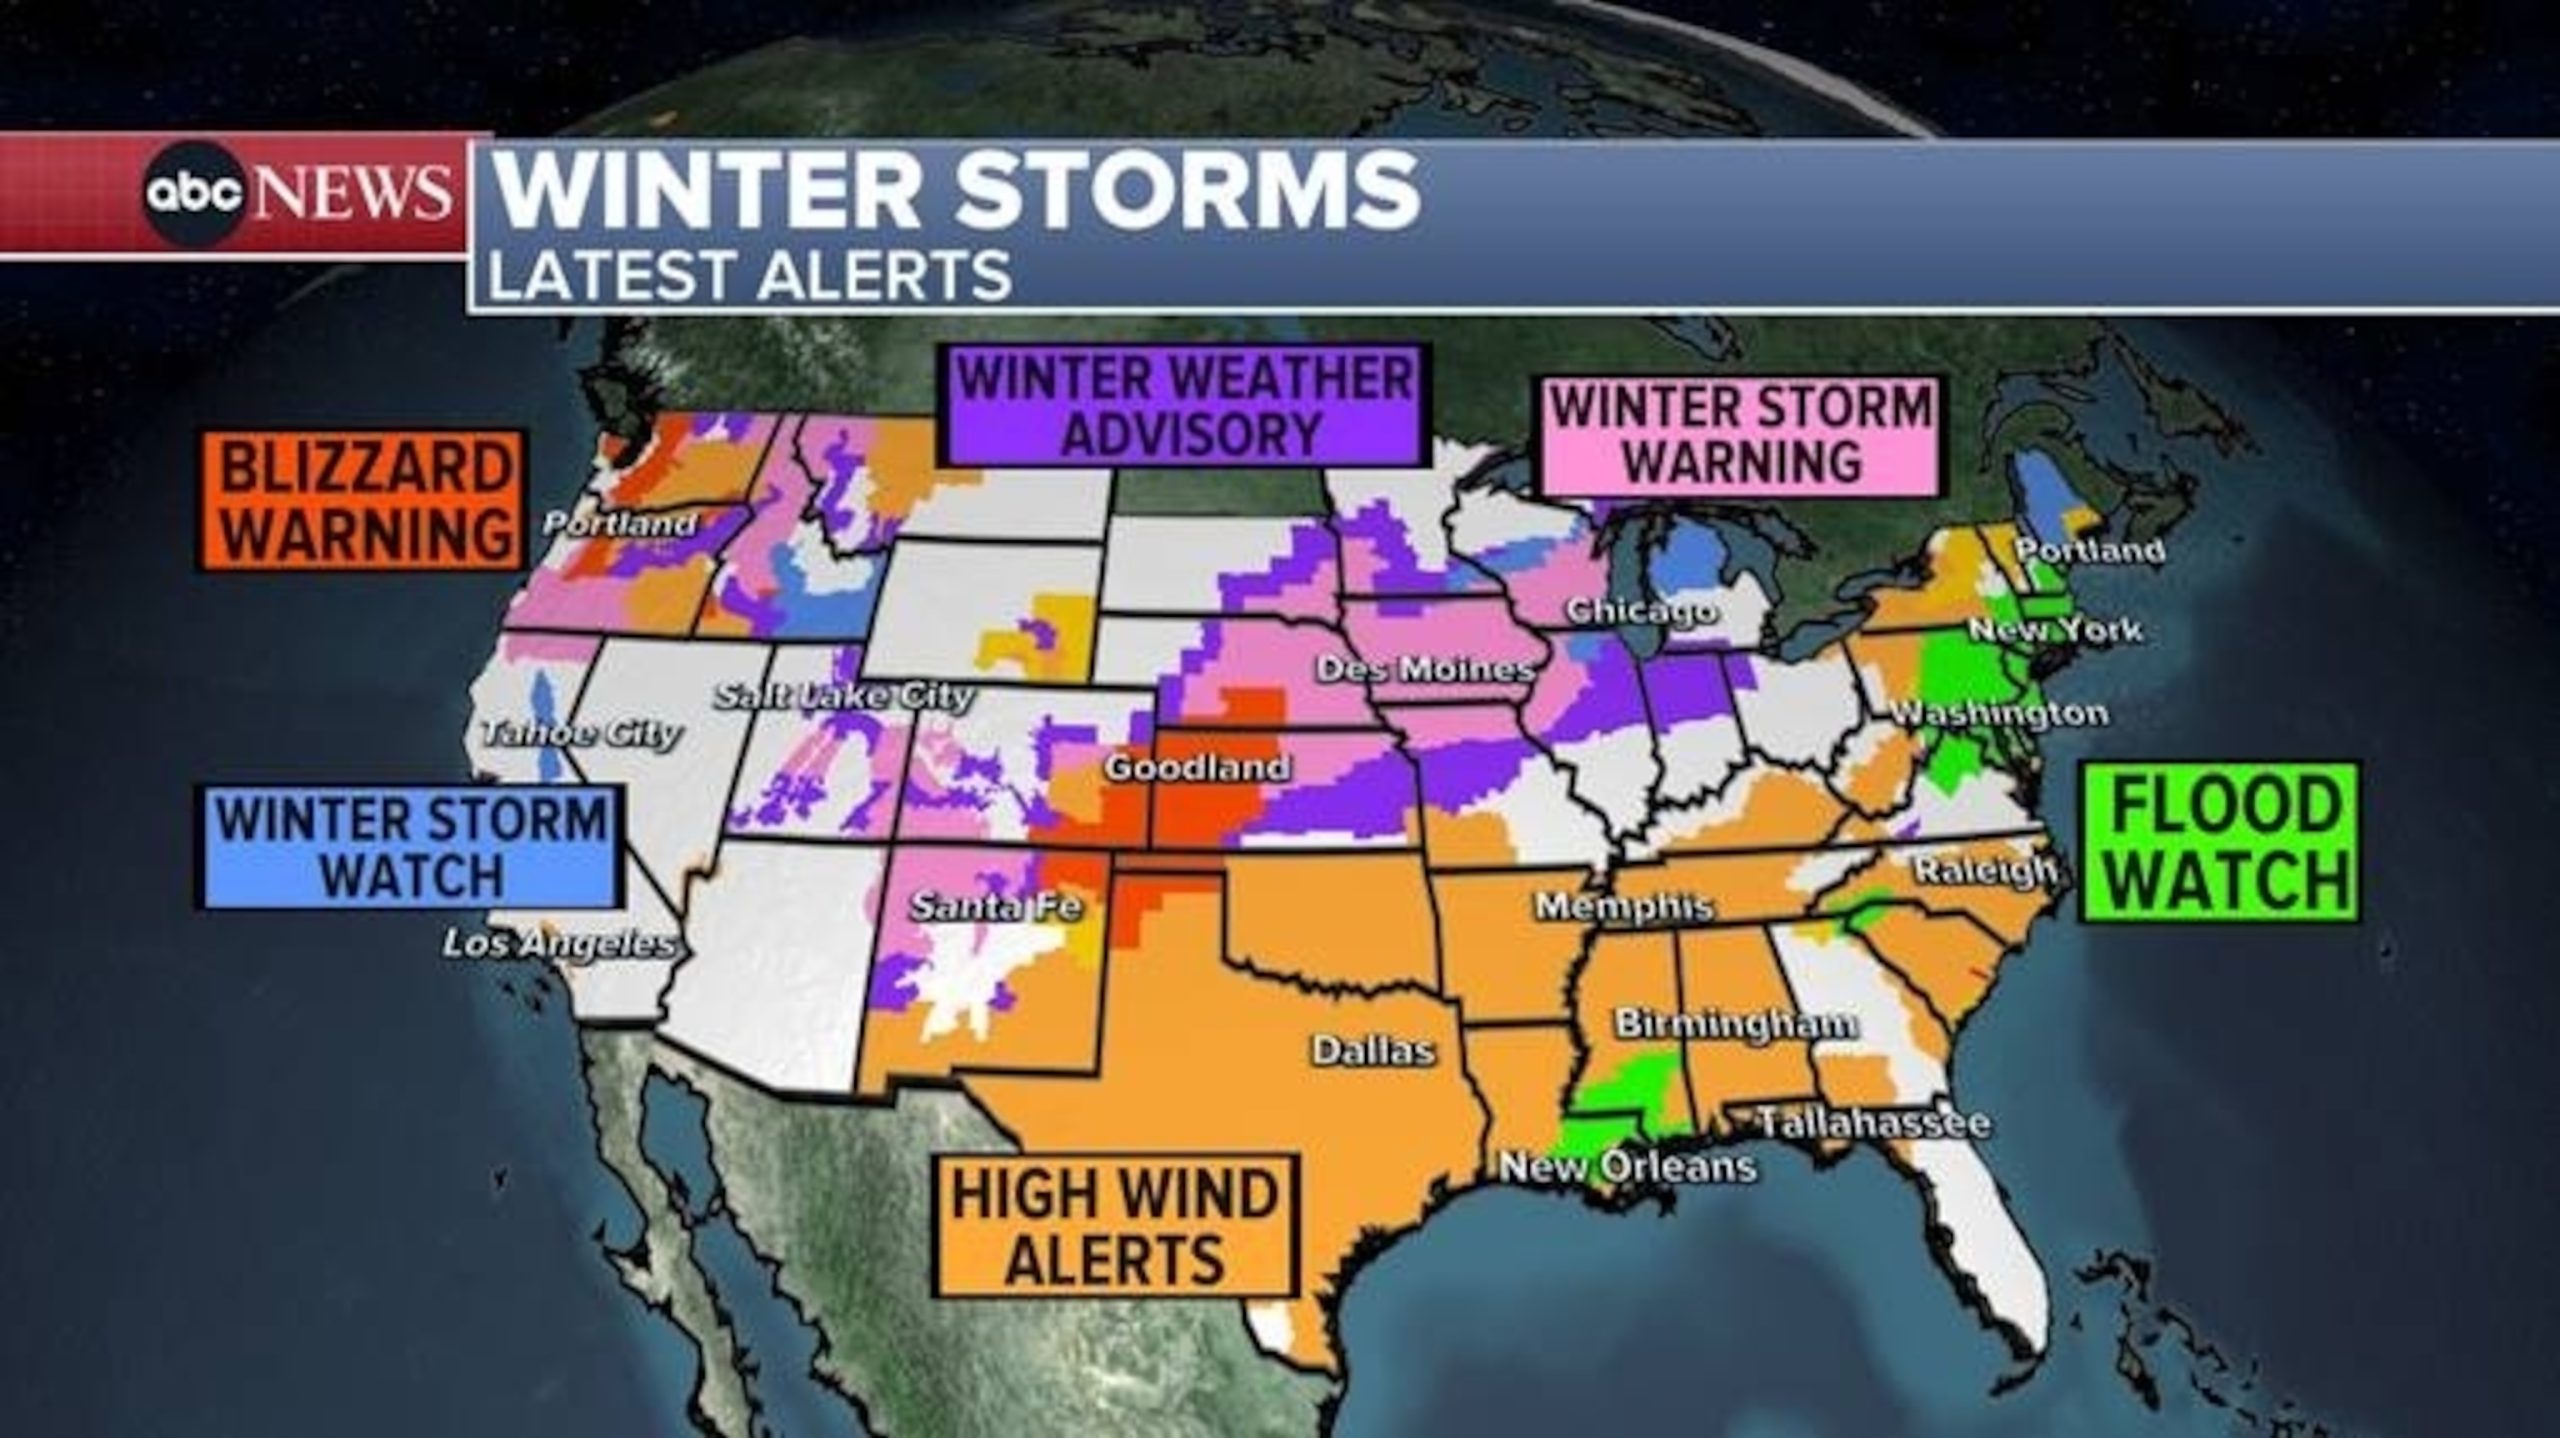 Winter Storms Cross Country: 40 States Affected by Blizzard, Wind, or Flood Alerts on Monday